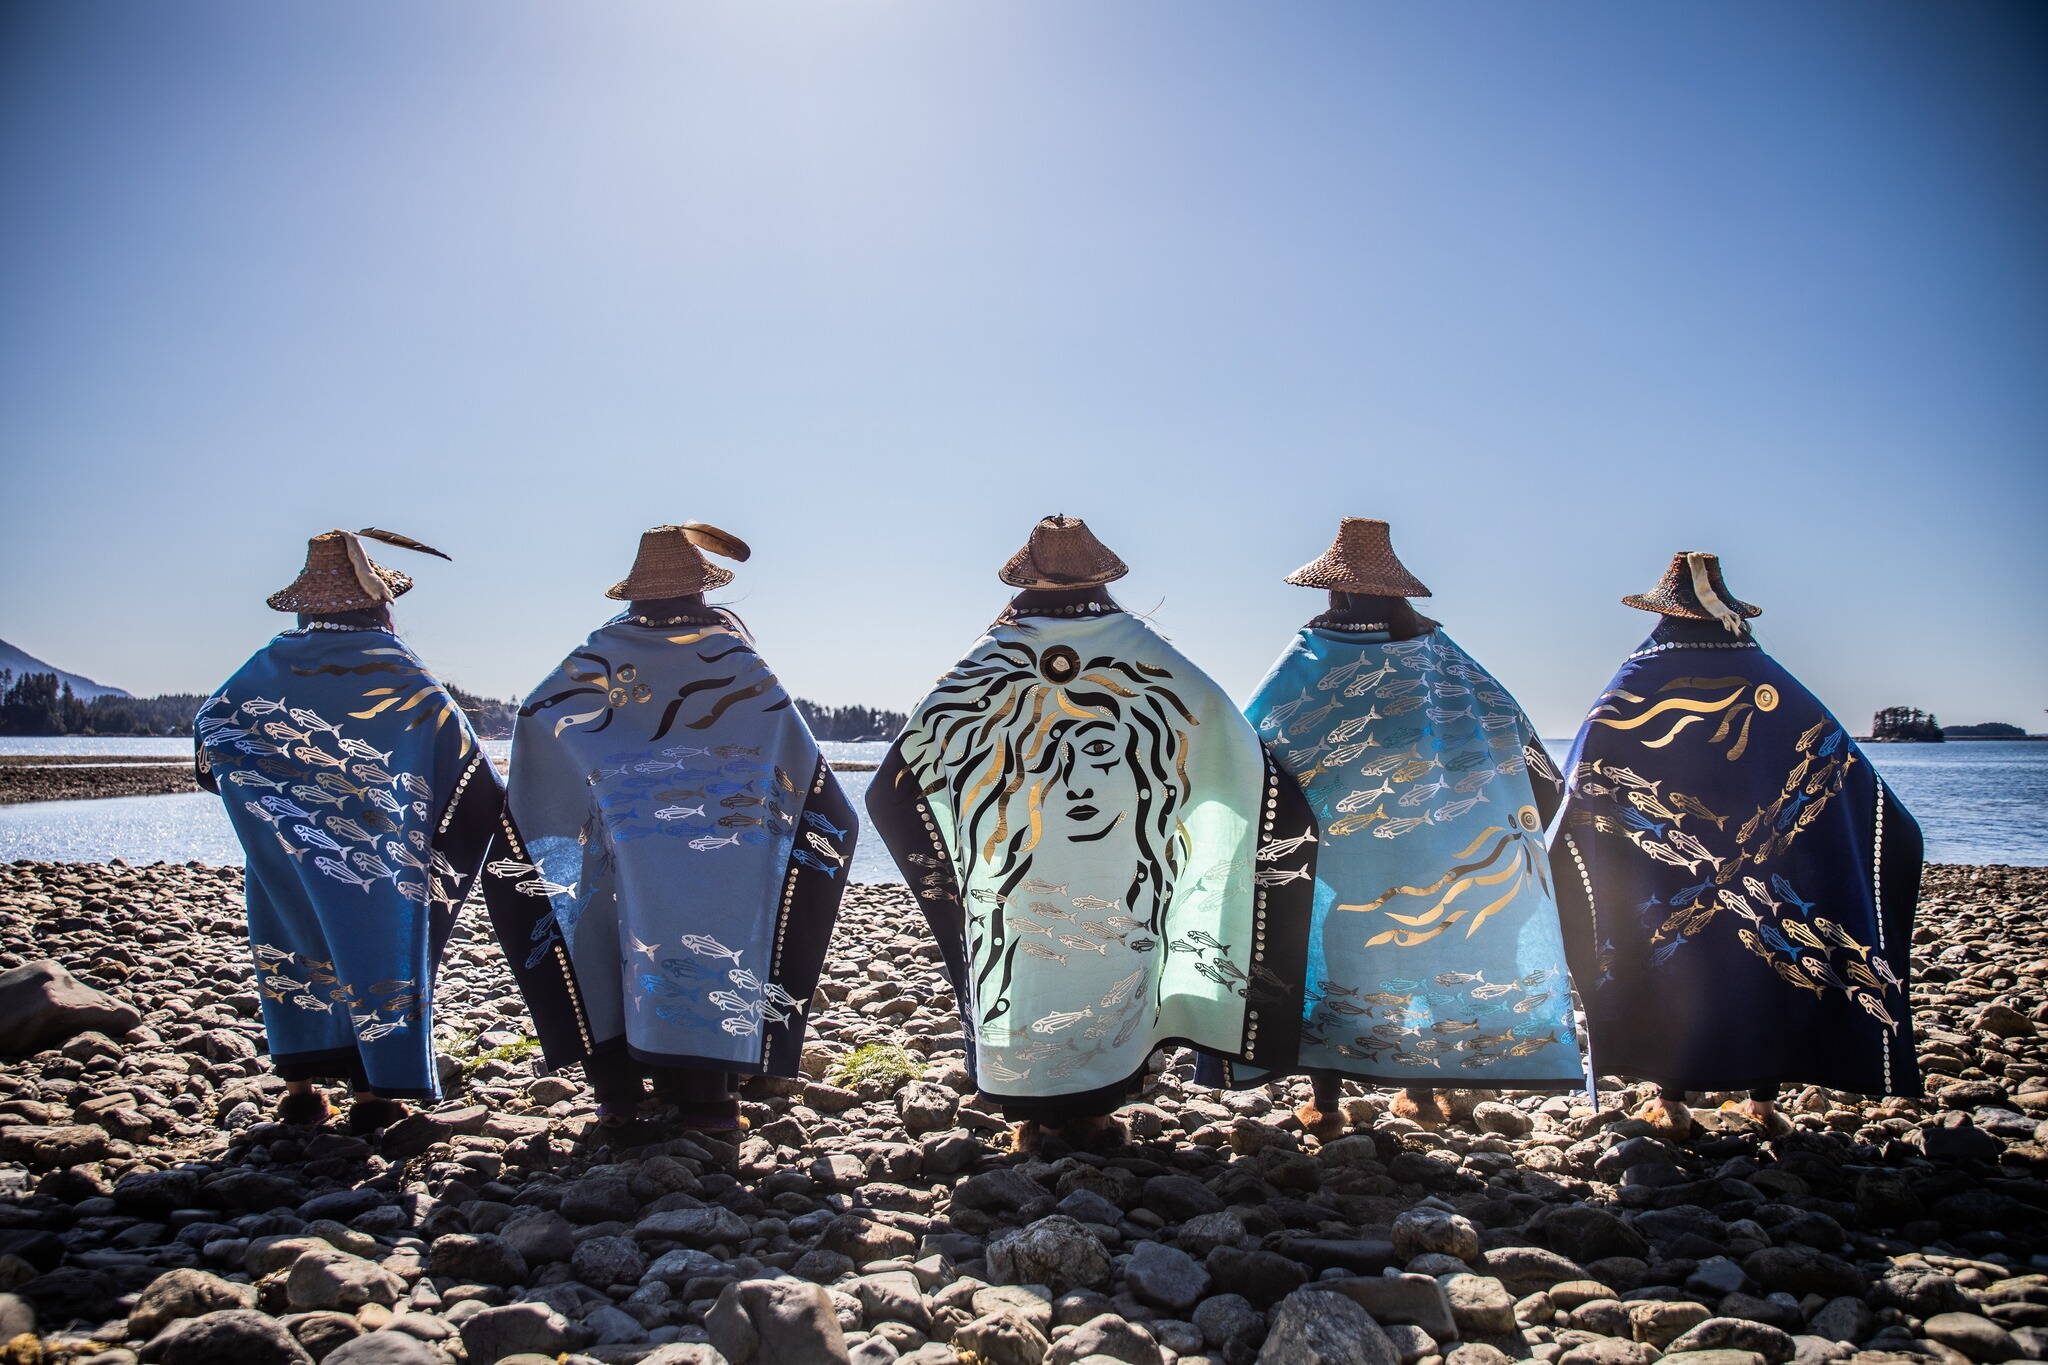 Kaxhatjaa X’óow/Herring Protectors wearing robes, which will be part of the exhibit “Protection: Adaptation & Resistance” at the Alaska State Museum on Friday. (Photo by Caitlin Blaisdell)